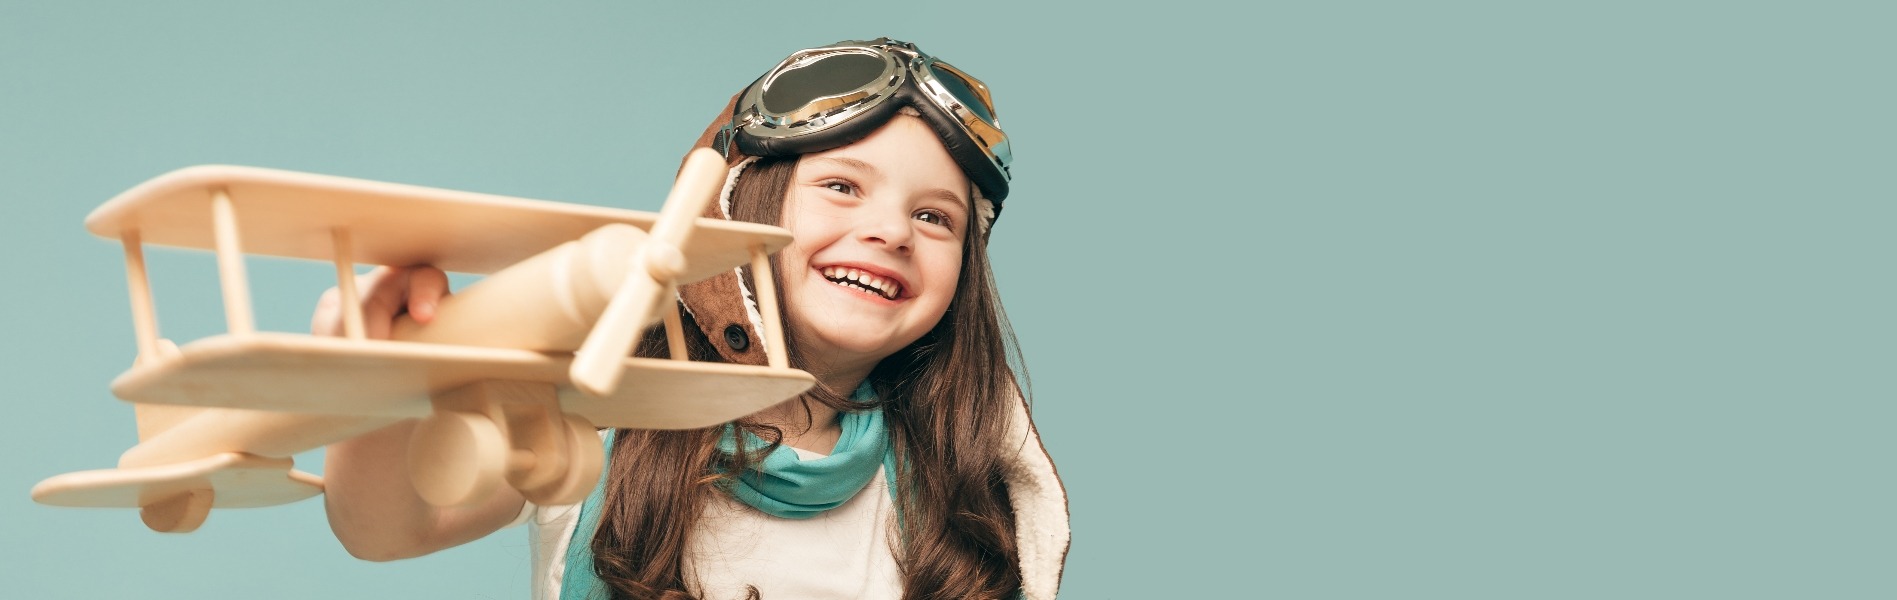 Little girl dressed as a pilot with model aeroplane